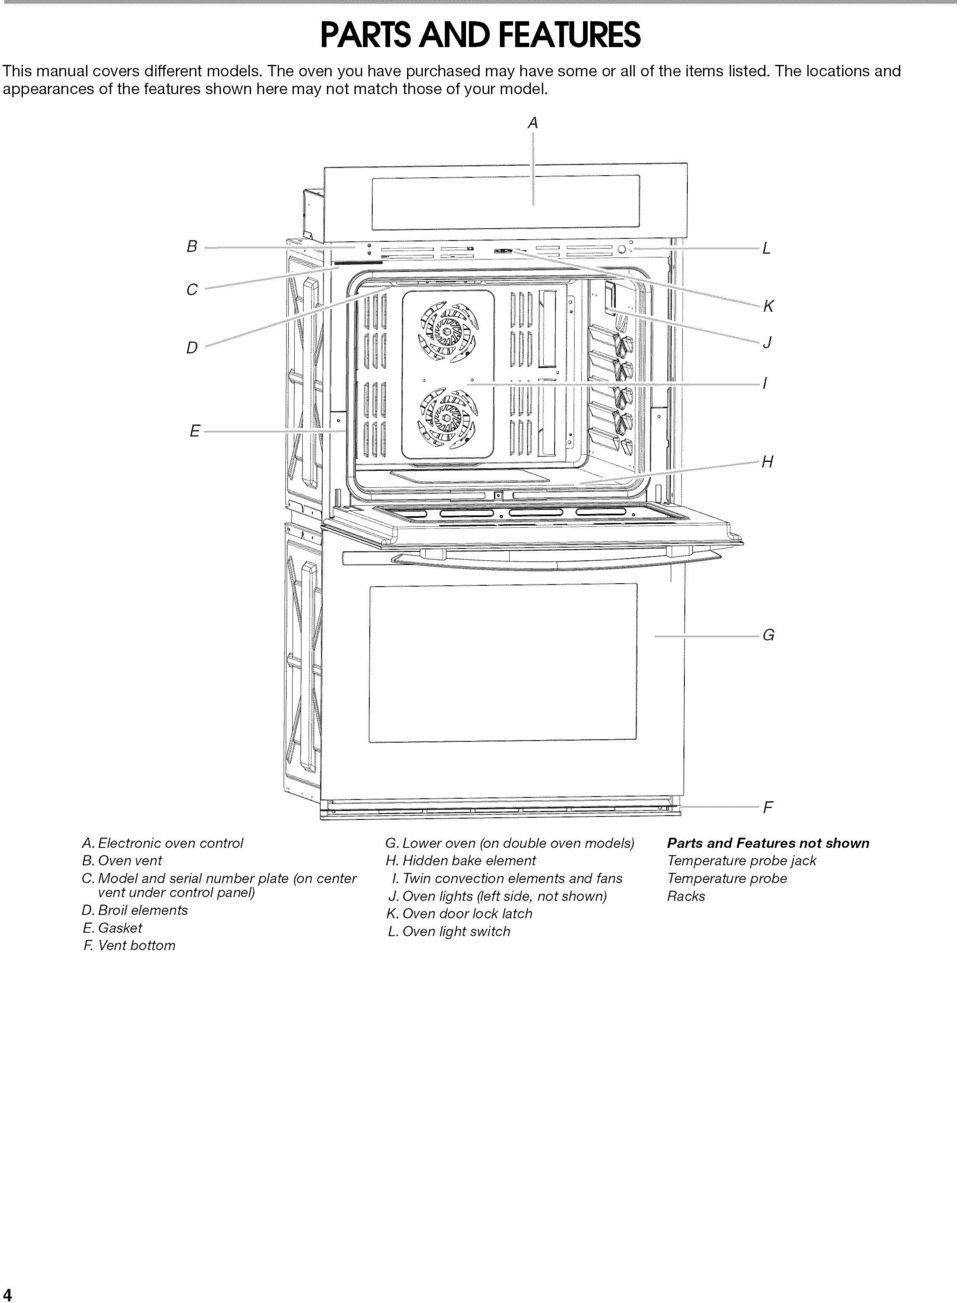 Electronic oven control B. Oven vent C. Model and serial number plate (on center vent under control panel) D. Broil elements E. Gasket F Vent bottom G.